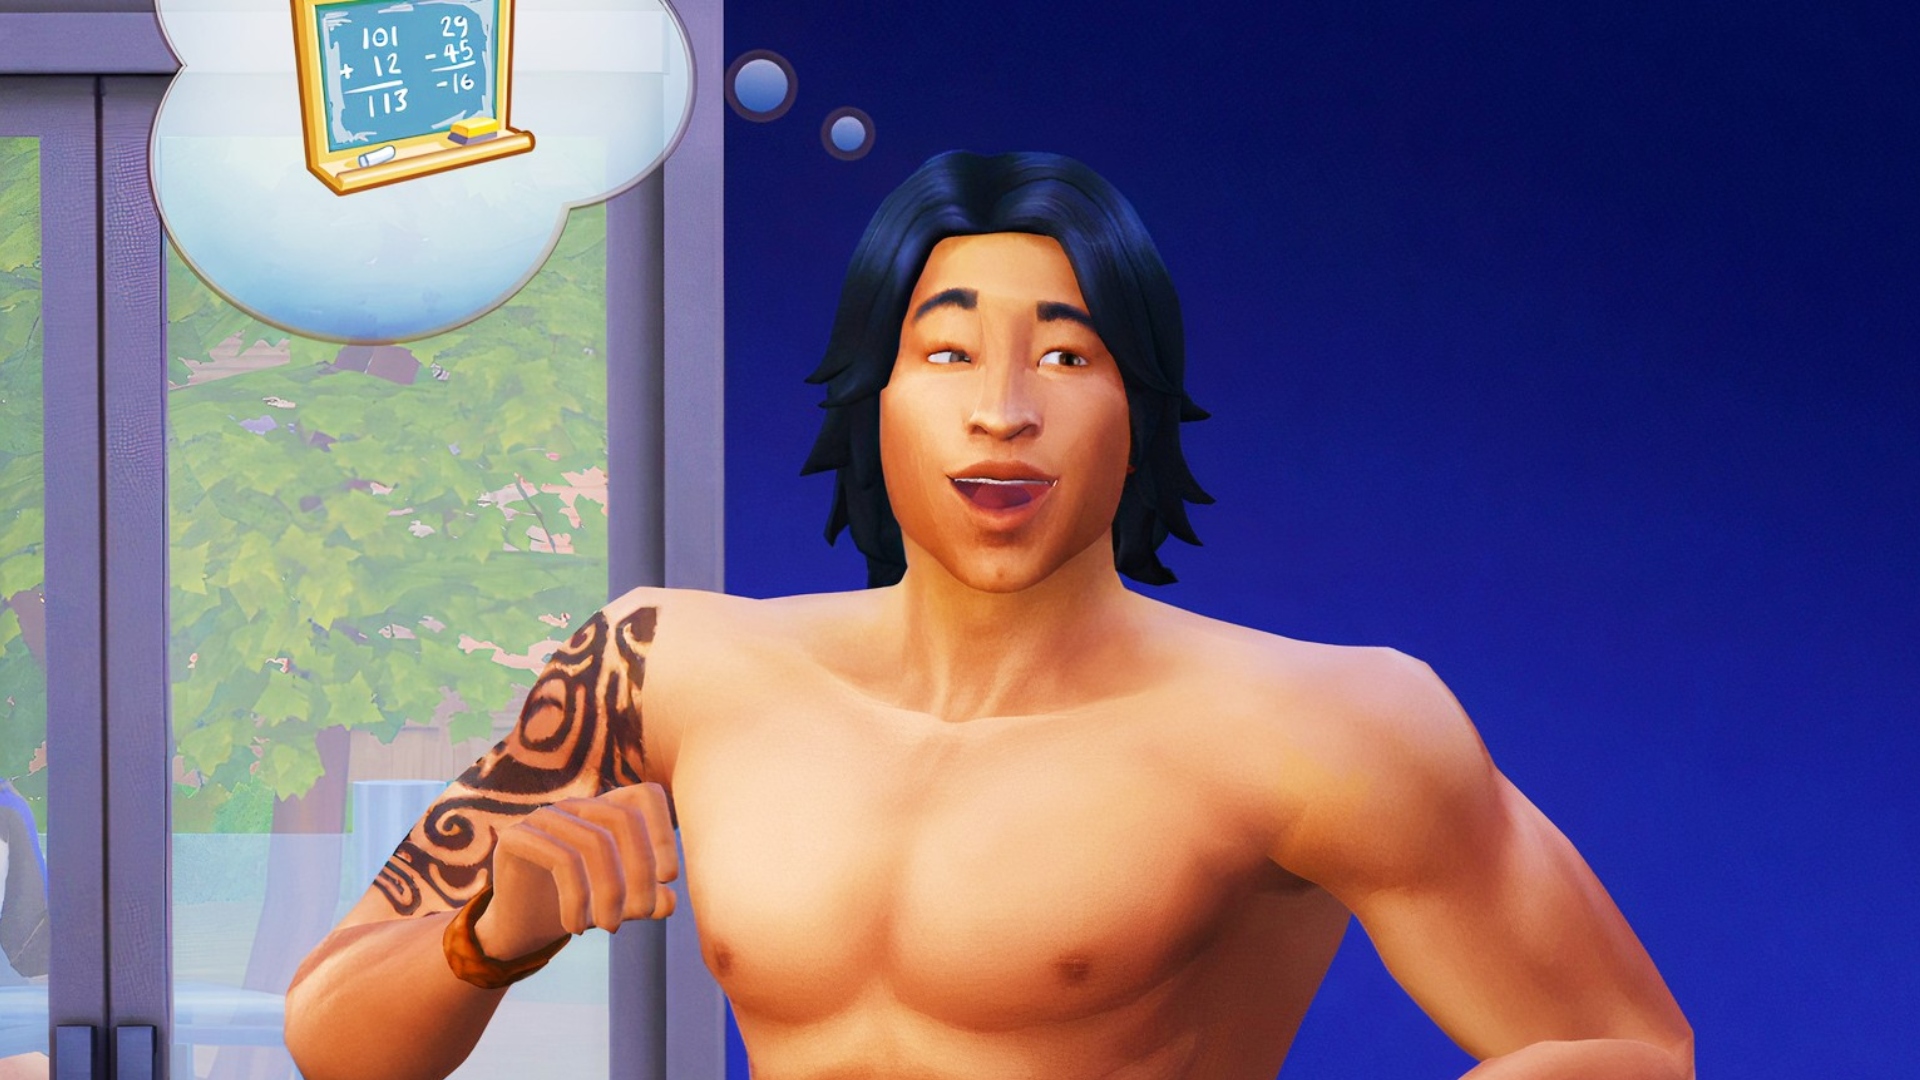 Sims 4 mod adds embarrassing sex memories to EA's life game